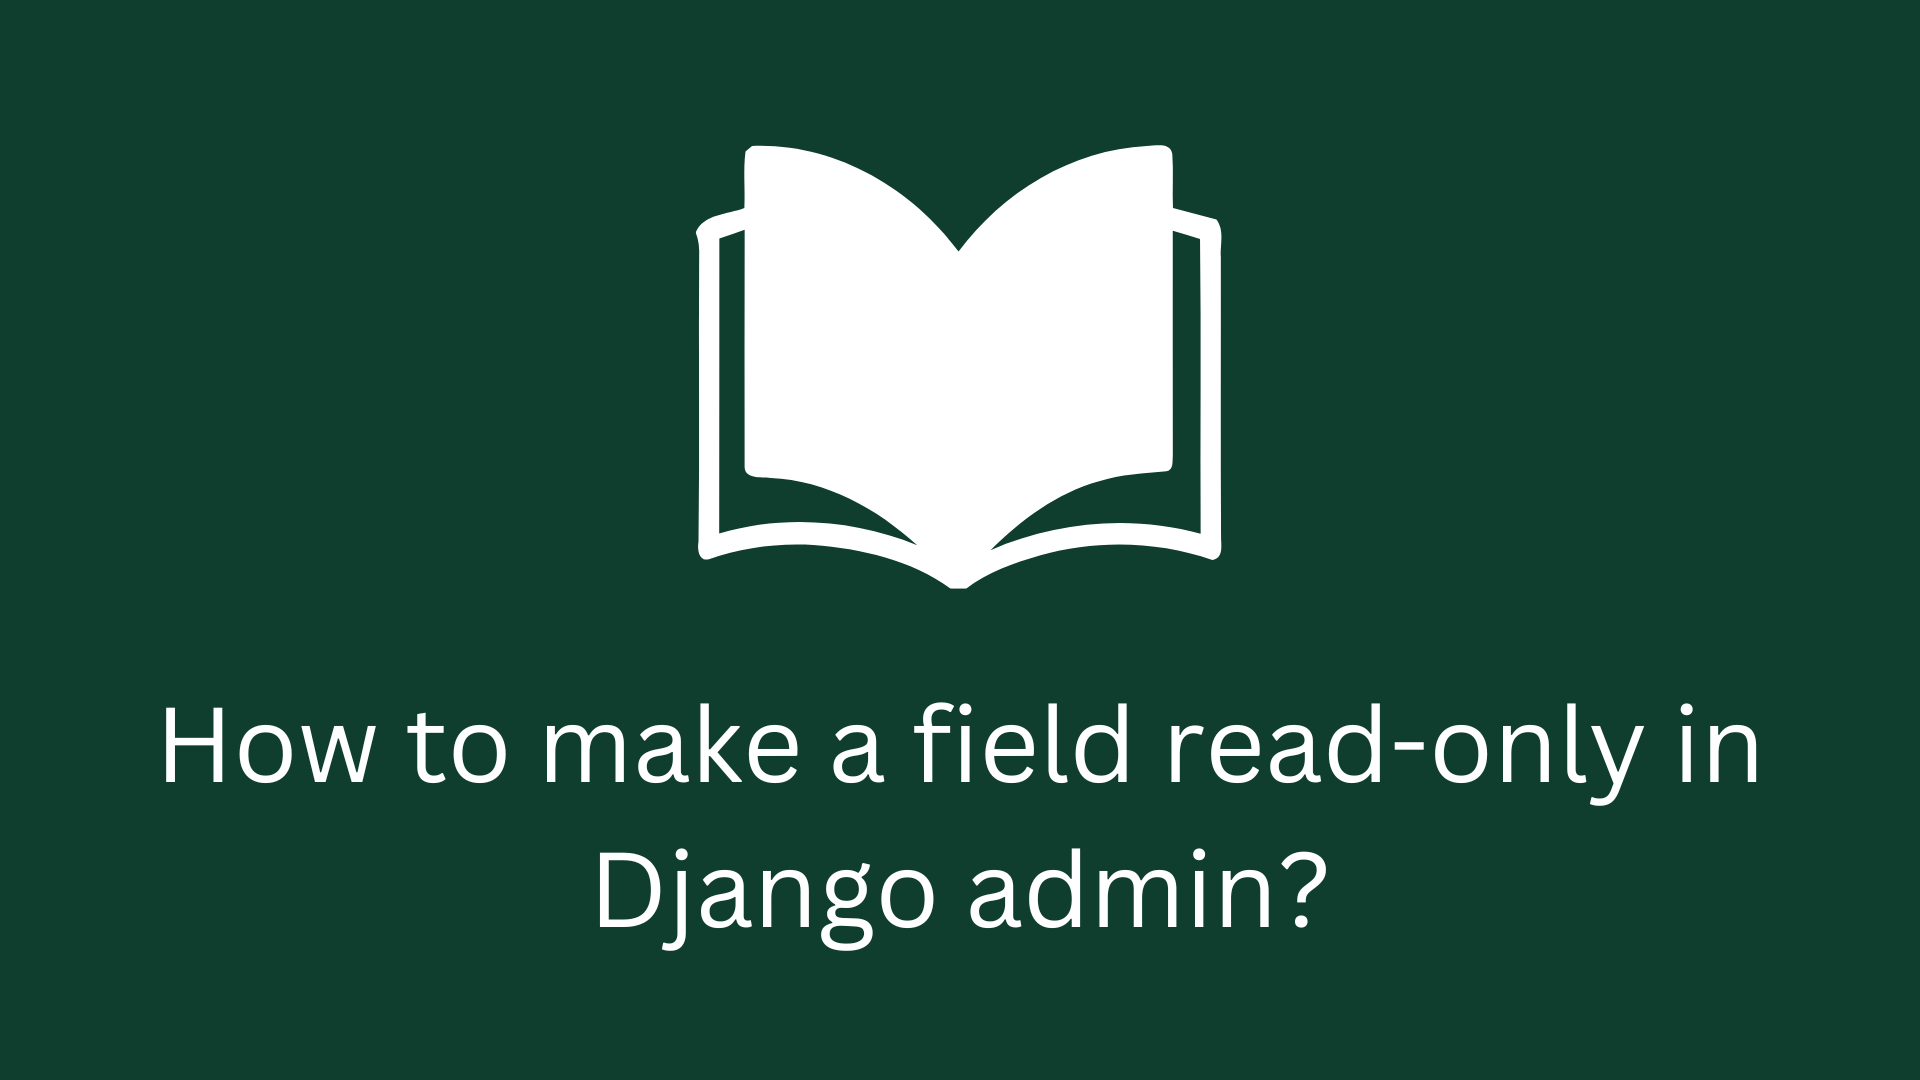 How to make a field read-only in Django admin